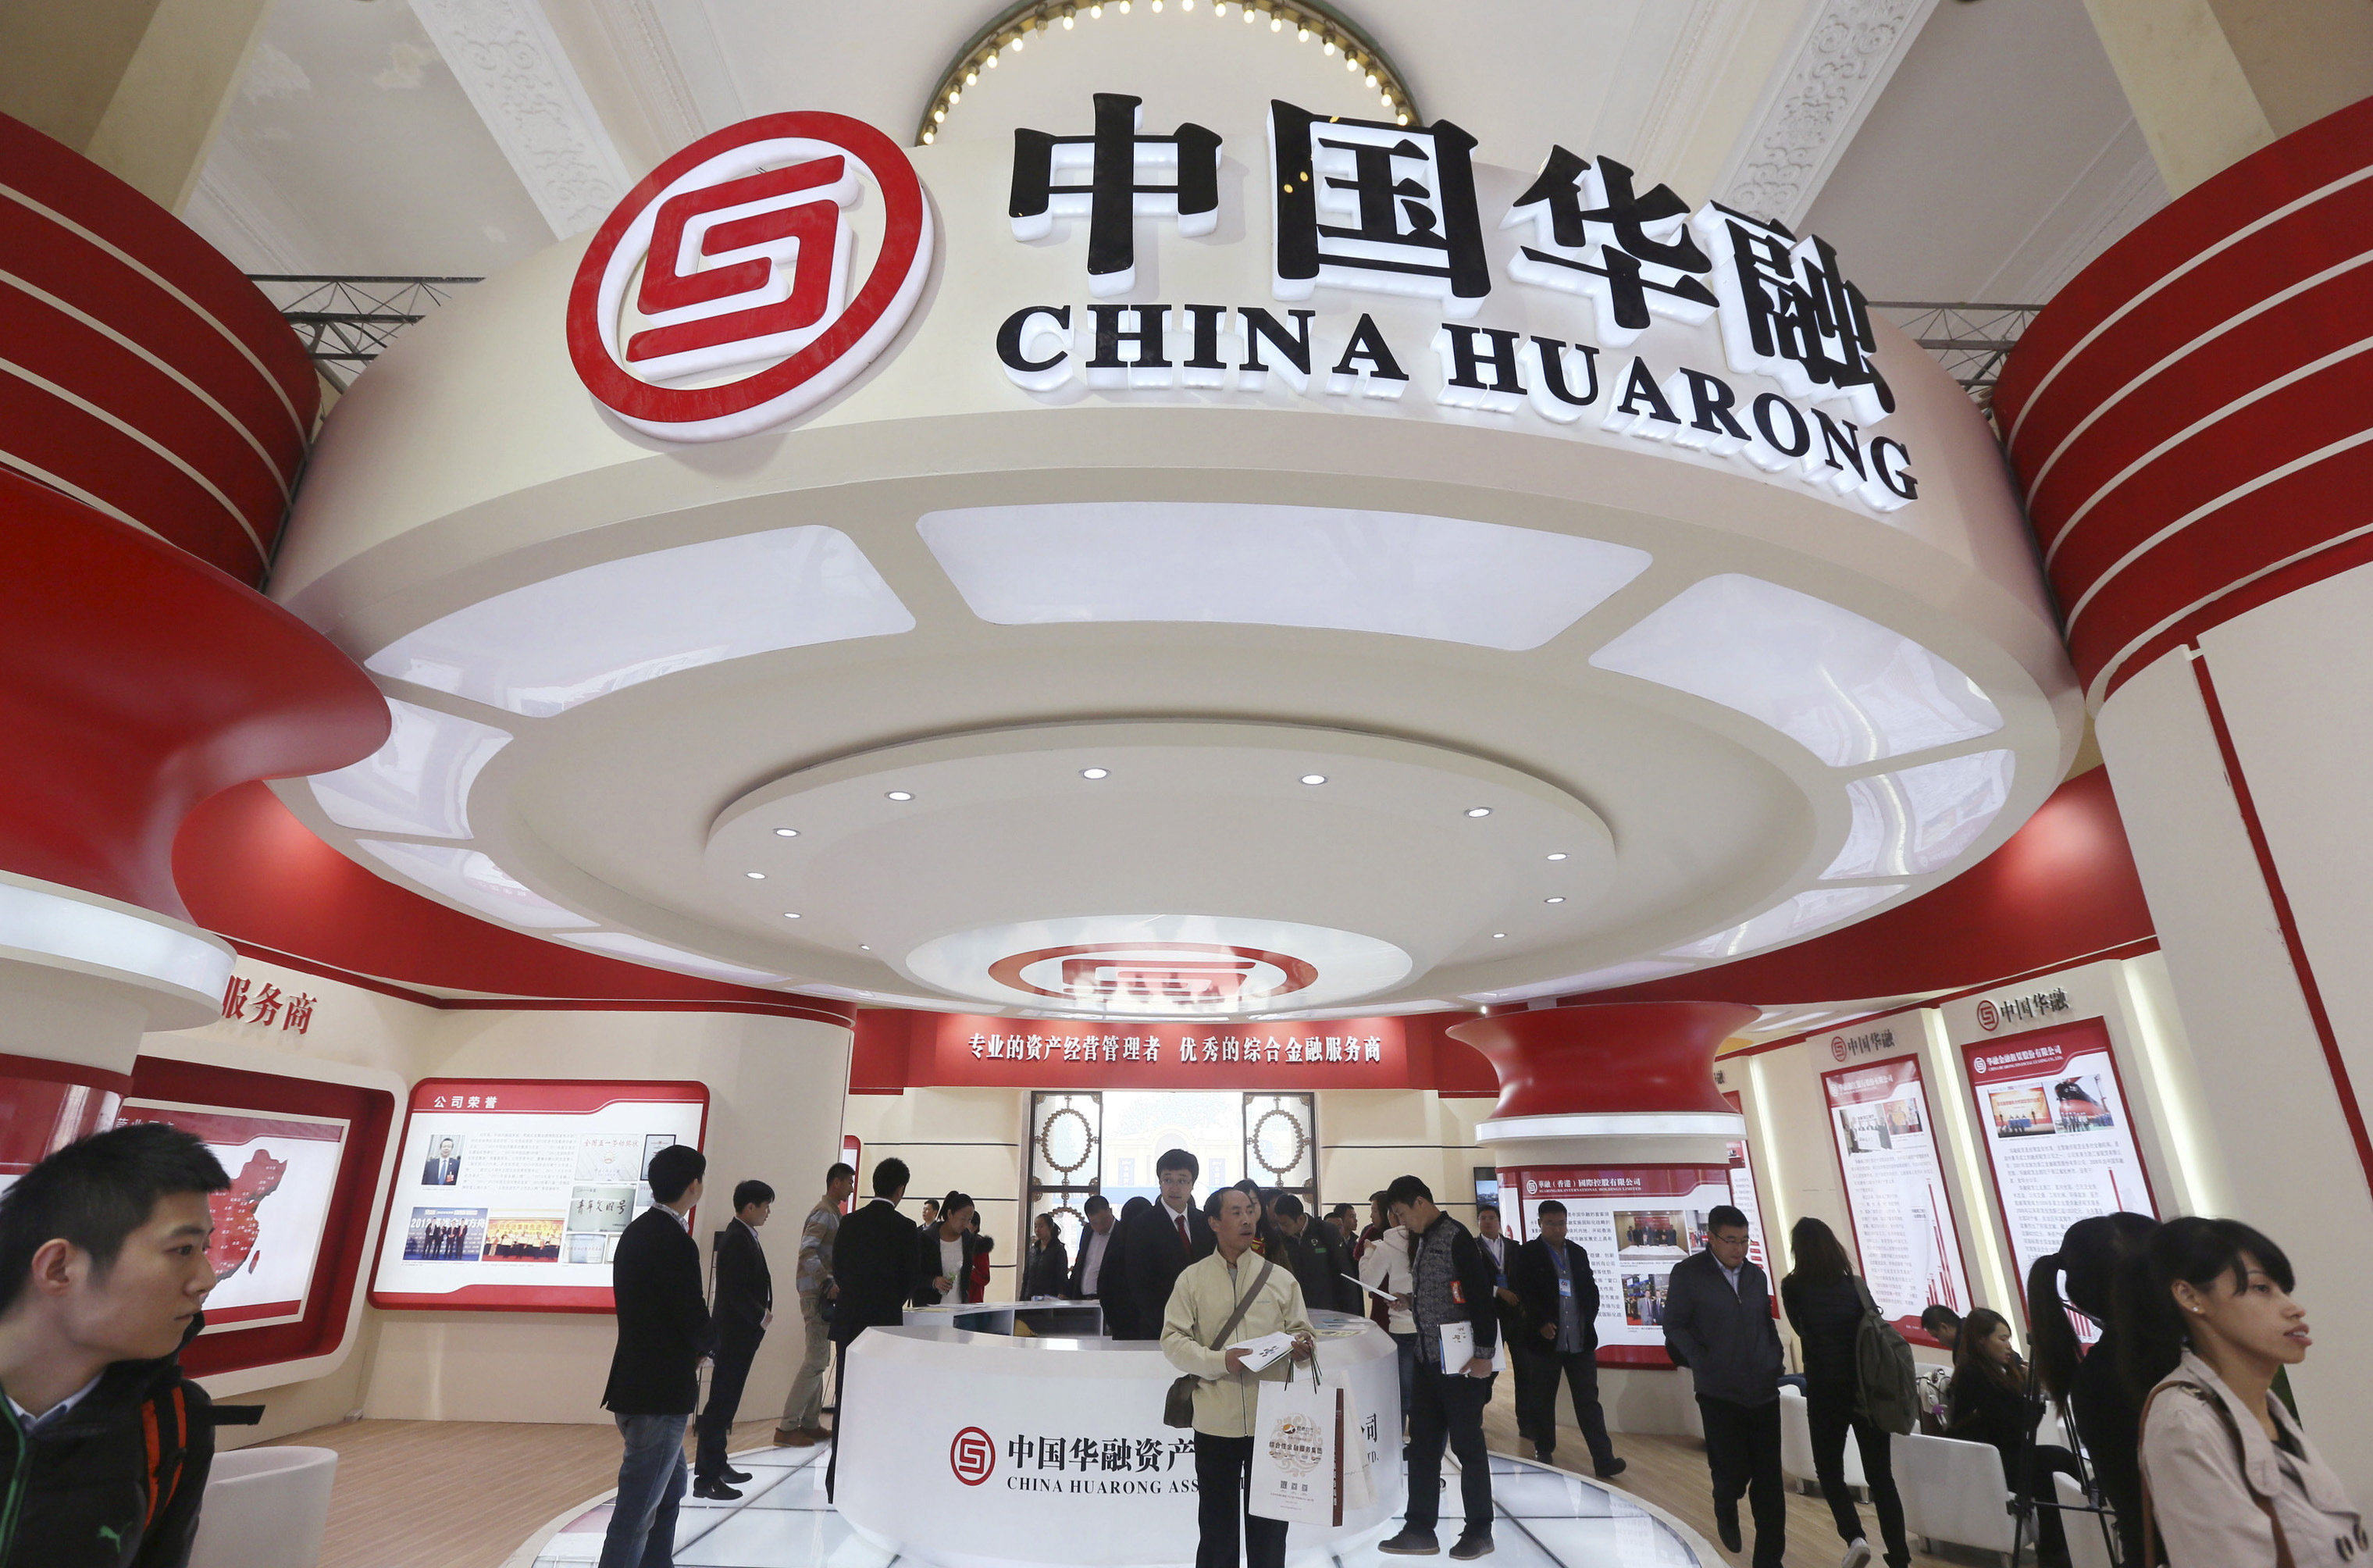 China Huarong is one of four state-owned entities set up by China in 1999 to help manage bad debt in the country’s banking system. Photo: China Daily via Reuters